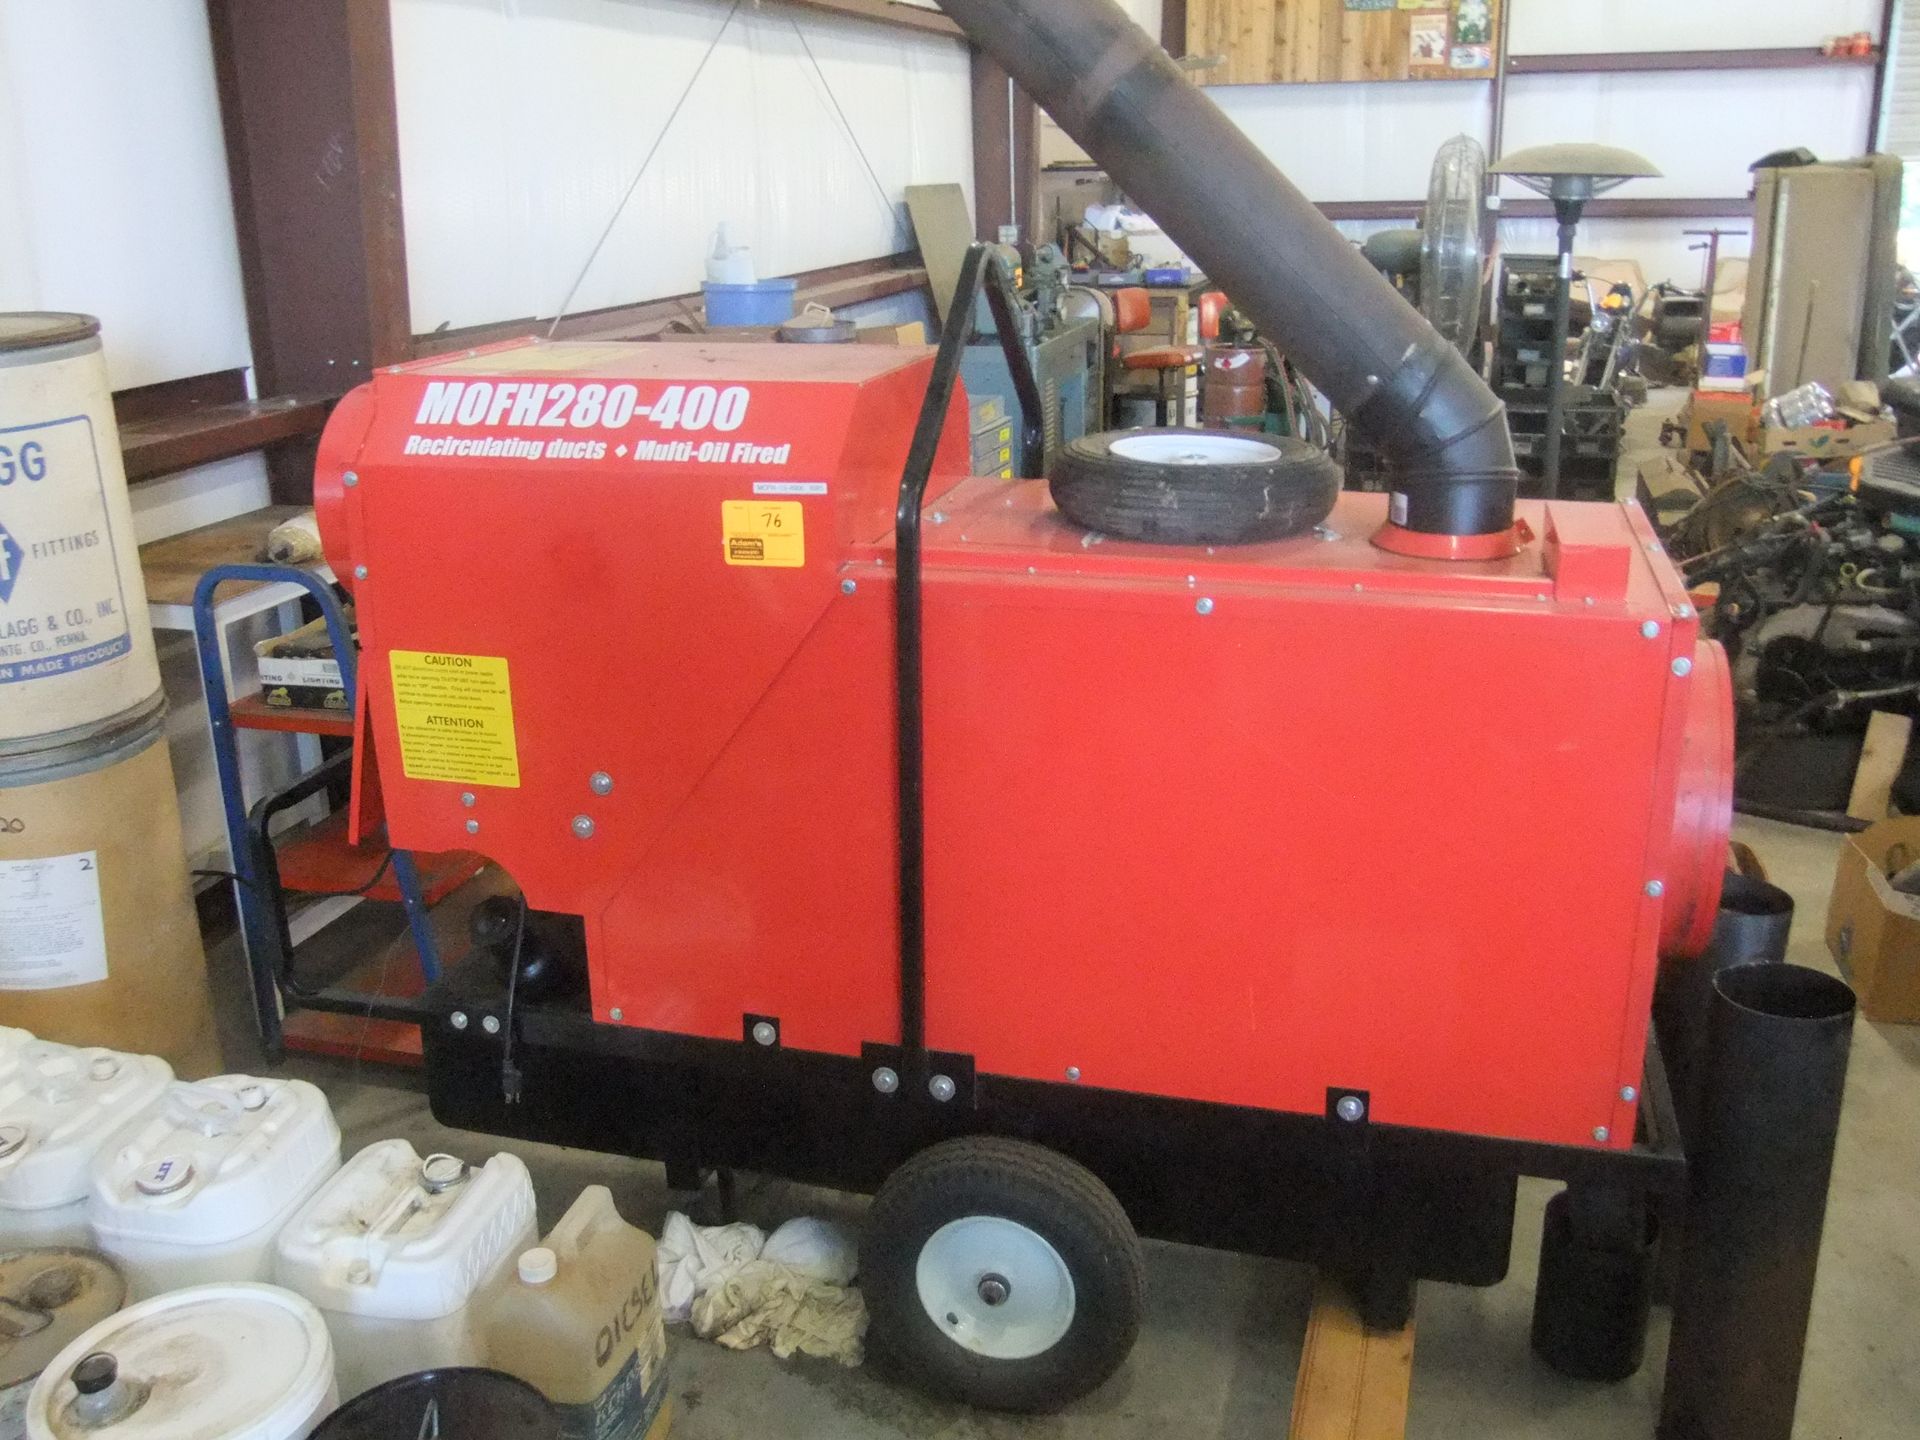 CAMPO EQUIPMENT HEATER. MODEL MOFH280-400